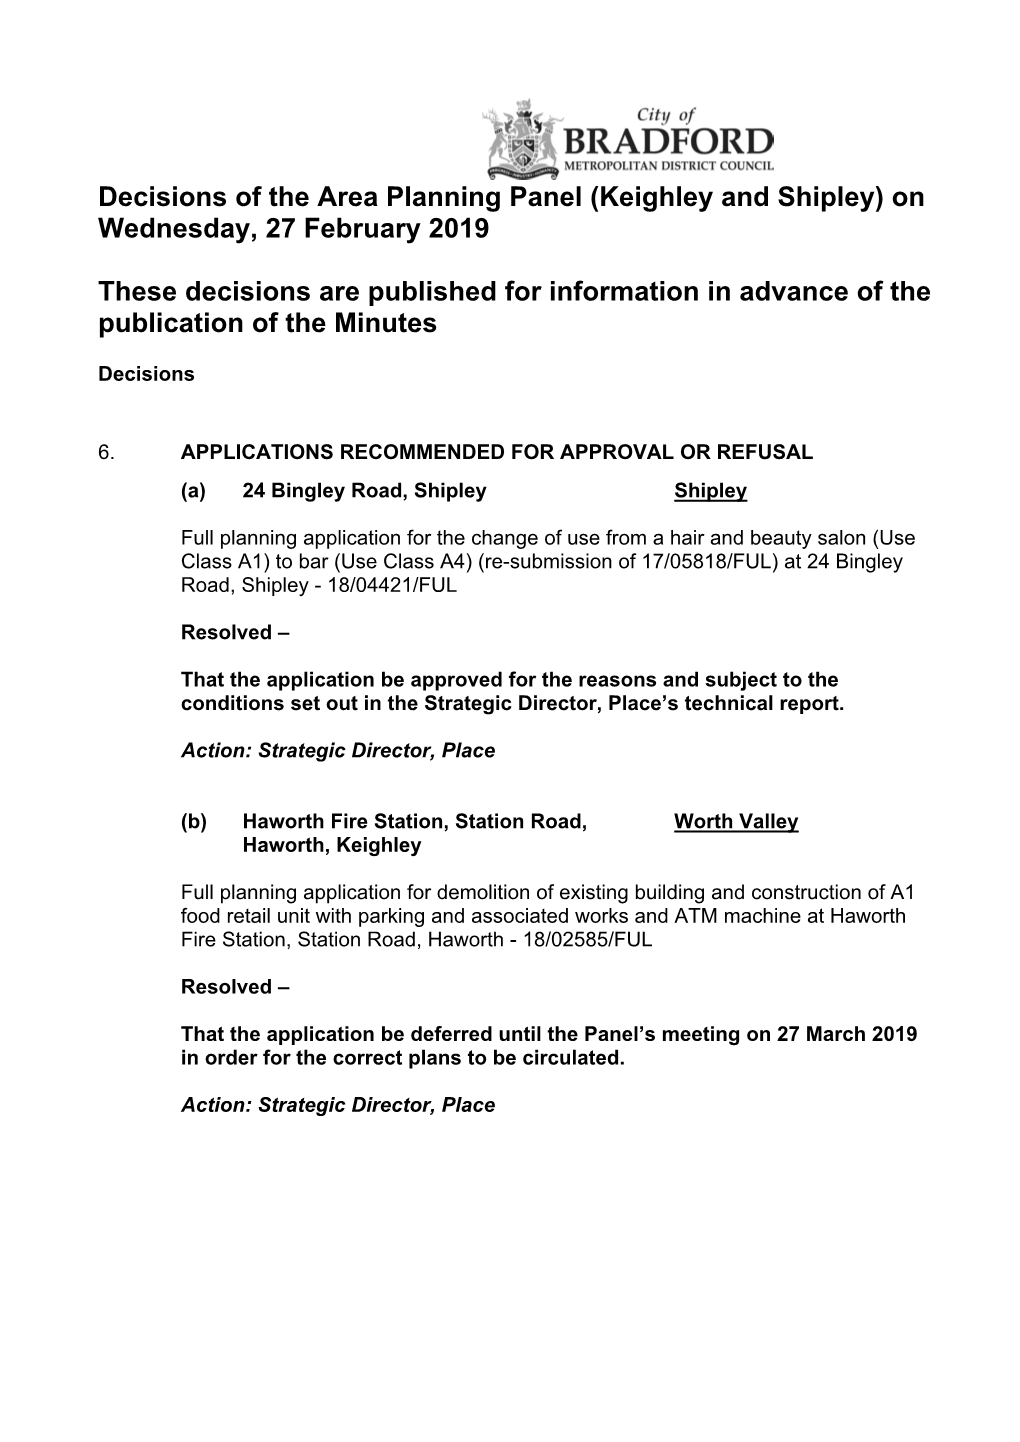 Decisions of the Area Planning Panel (Keighley and Shipley) on Wednesday, 27 February 2019